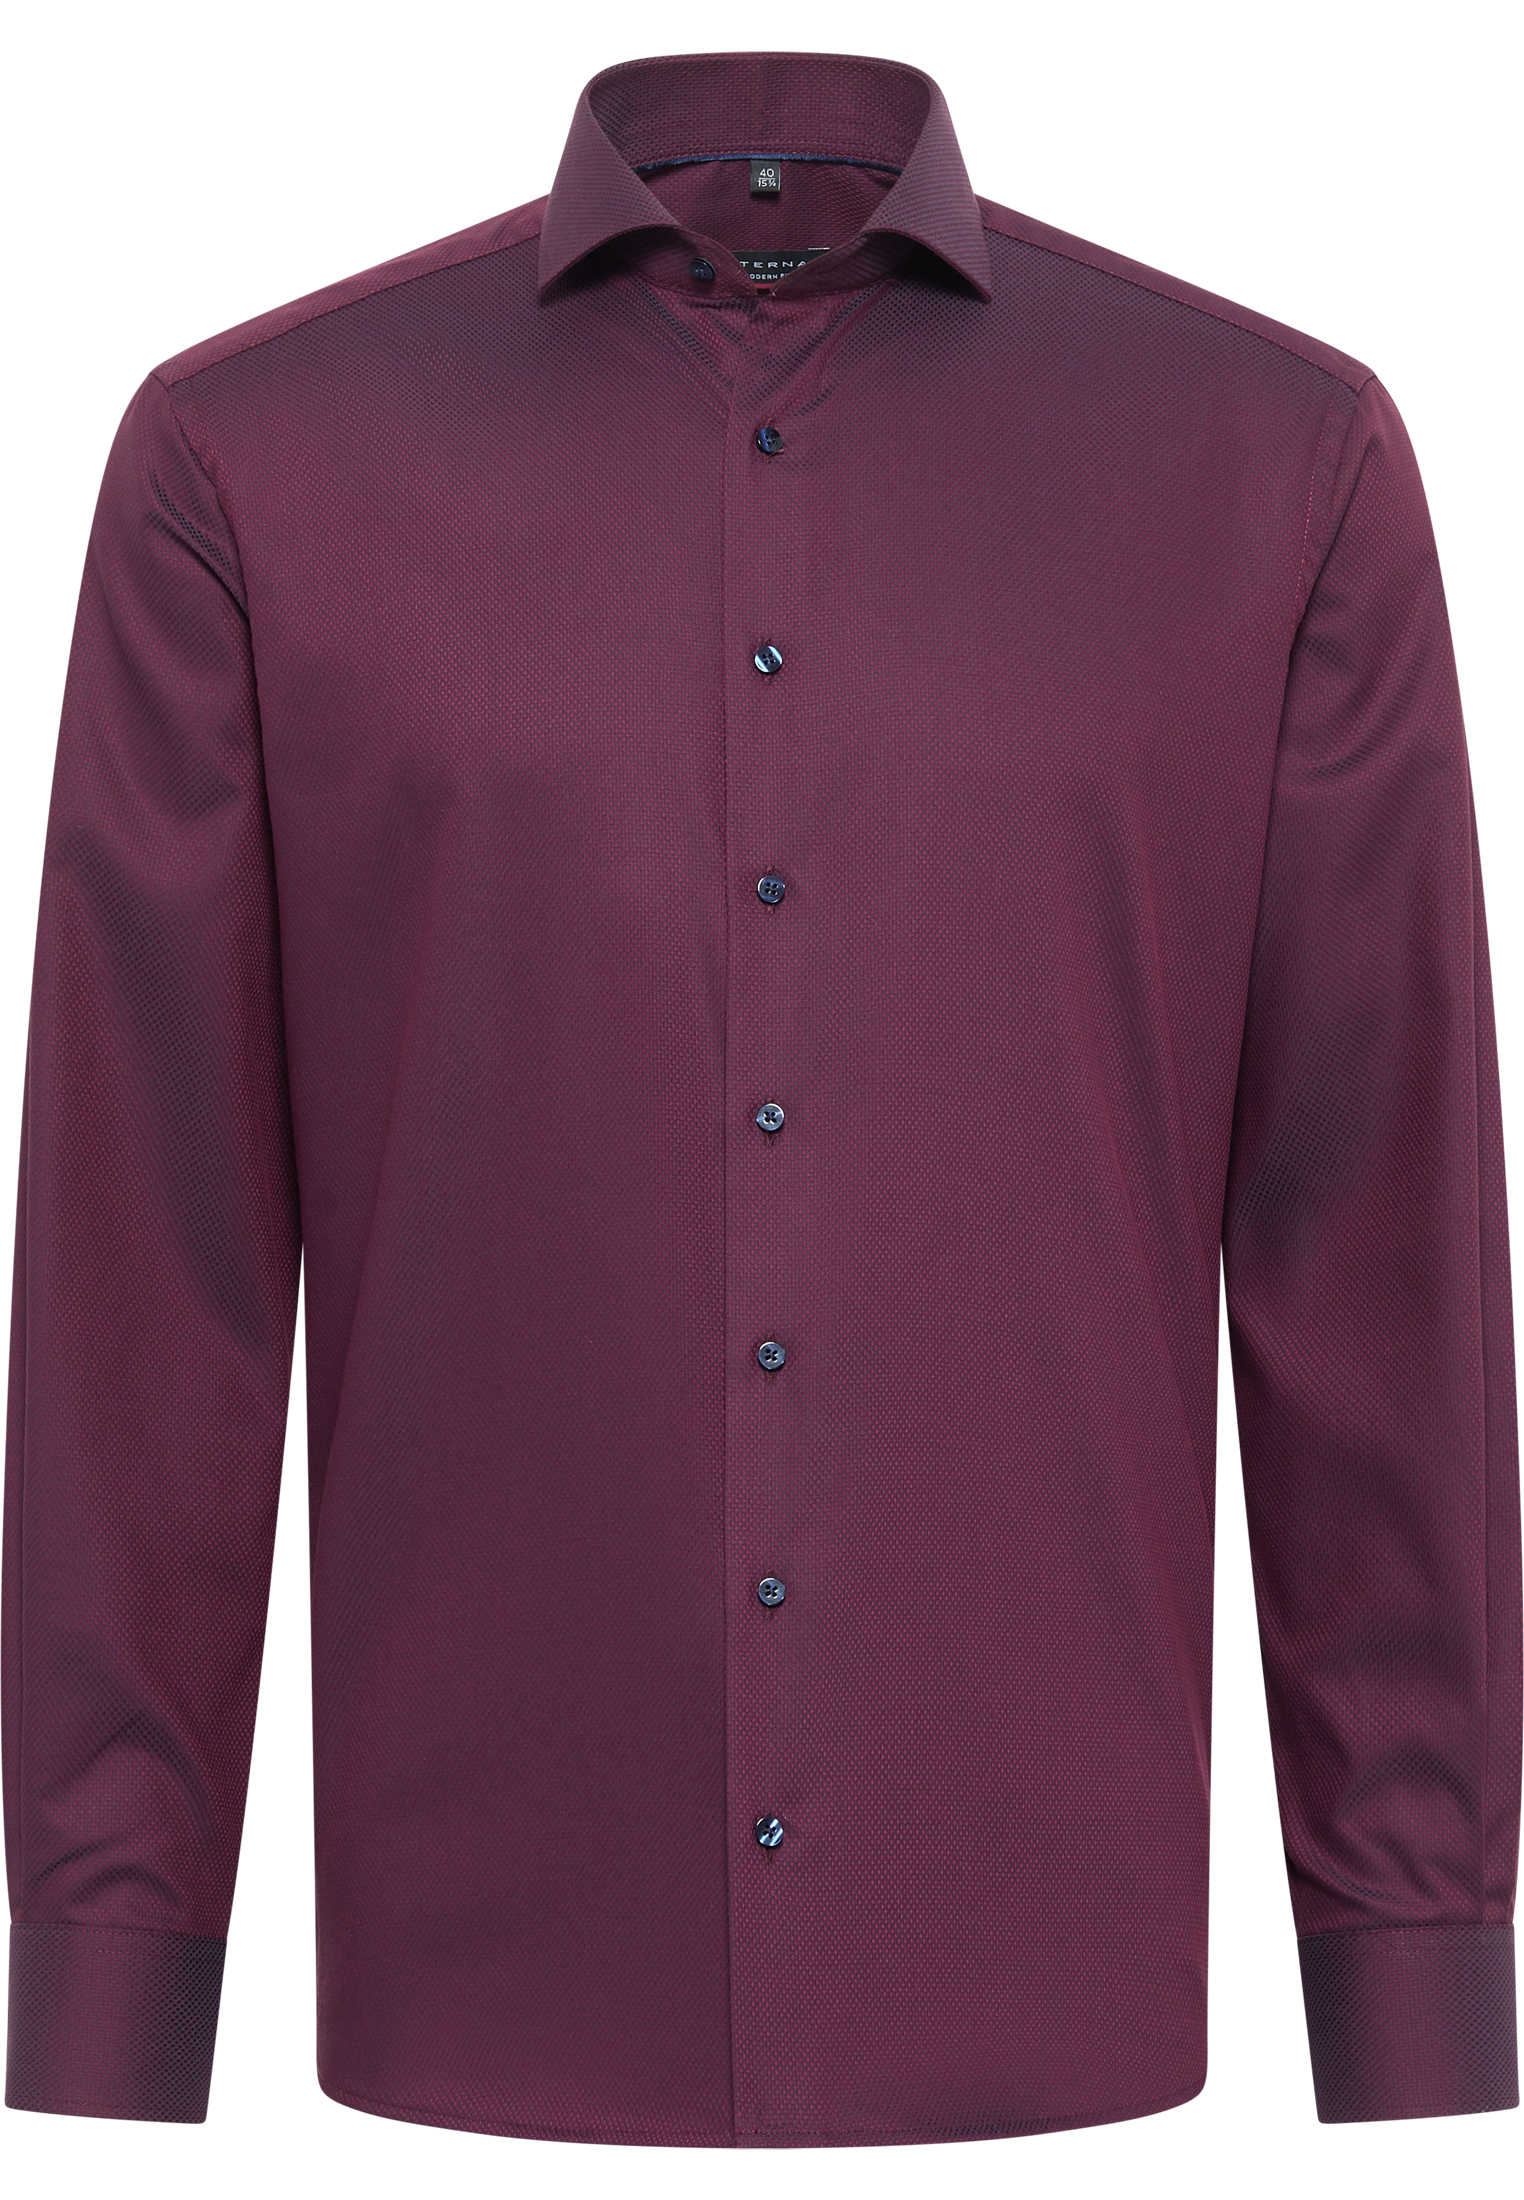 MODERN FIT Shirt in bordeaux structured